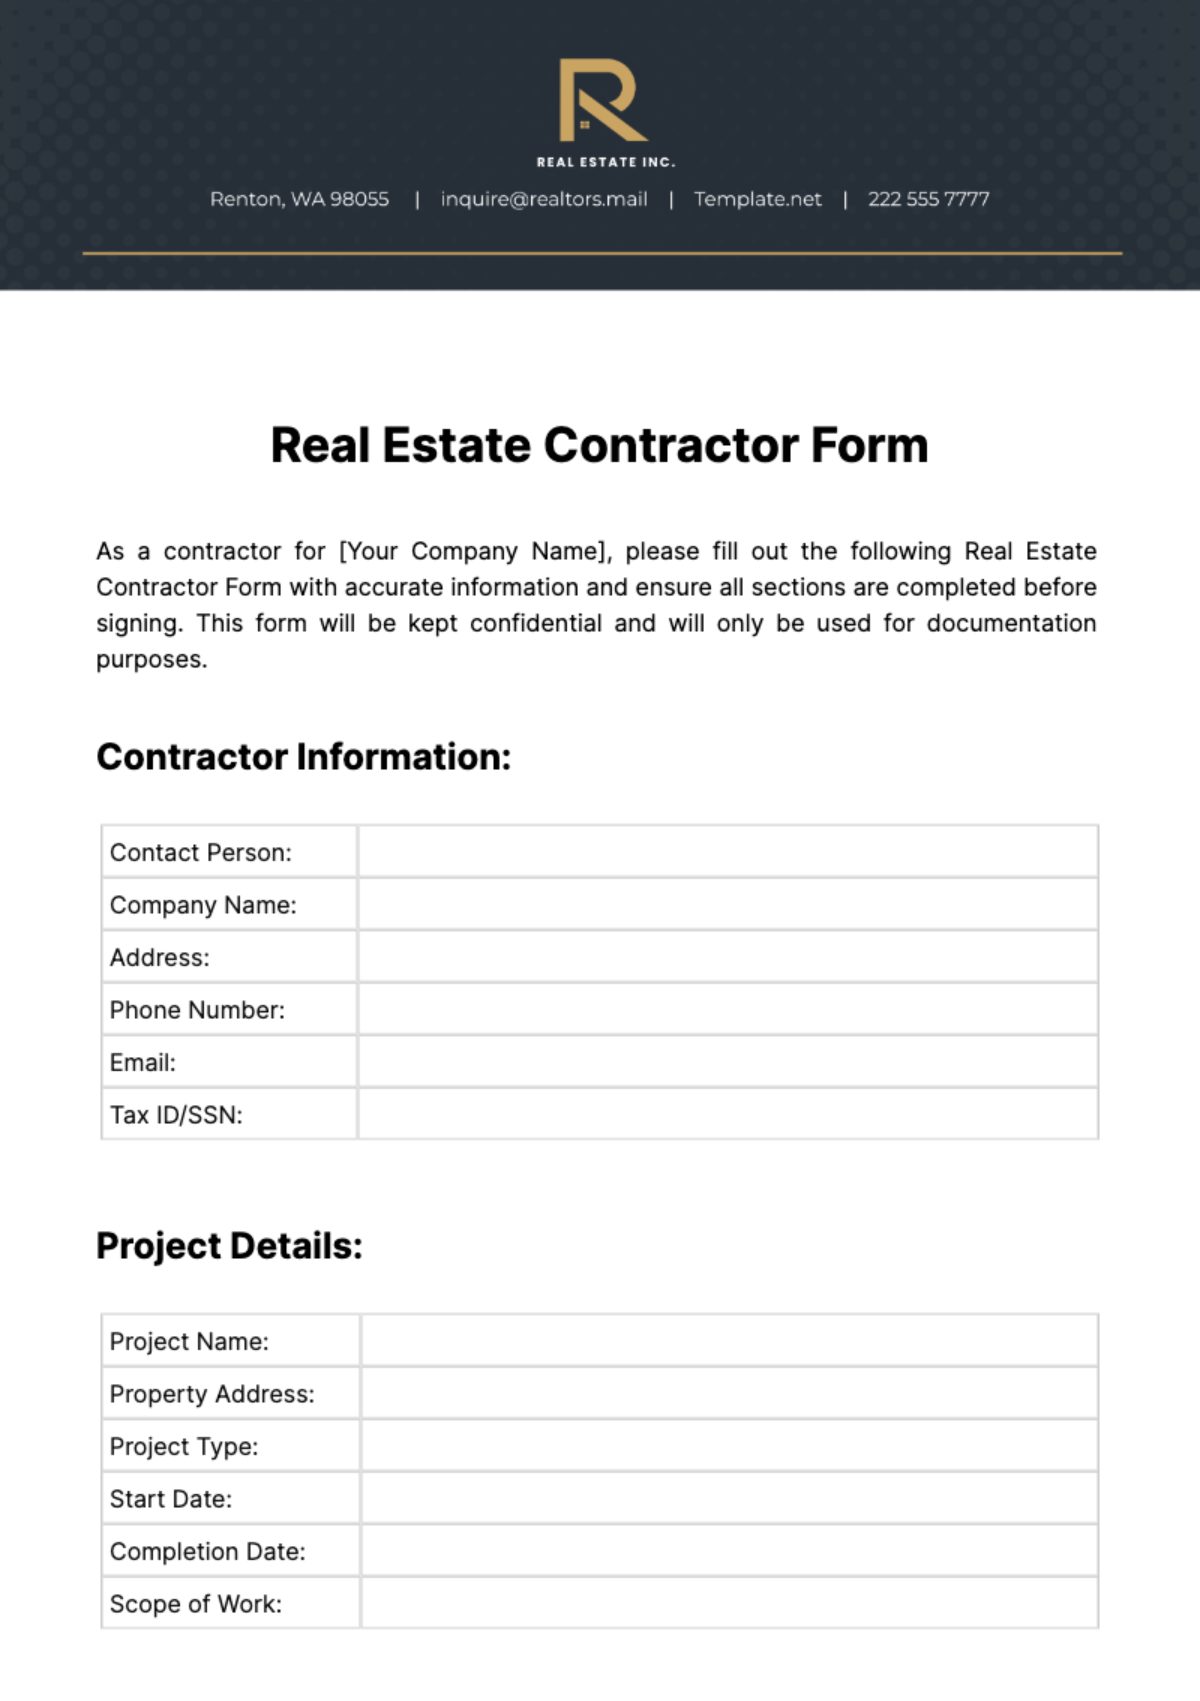 Free Real Estate Contractor Form Template